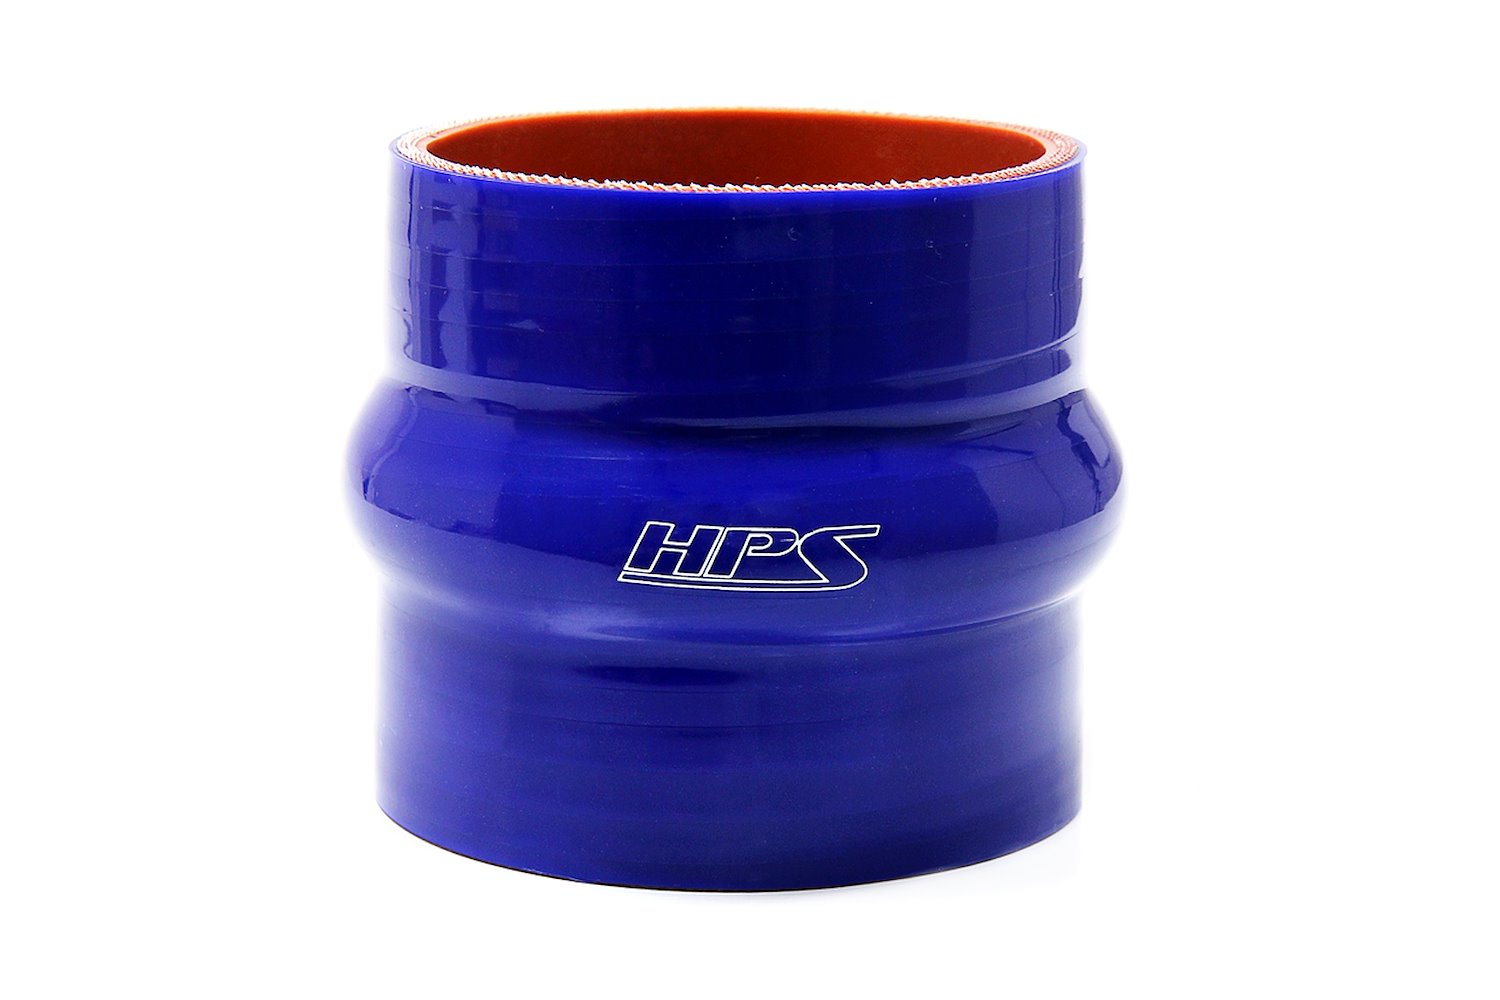 HTSHC-138-L6-BLUE Silicone Hump Coupler Hose, High-Temp 4-Ply Reinforced, 1-3/8 in. ID, 6 in. Long, Blue